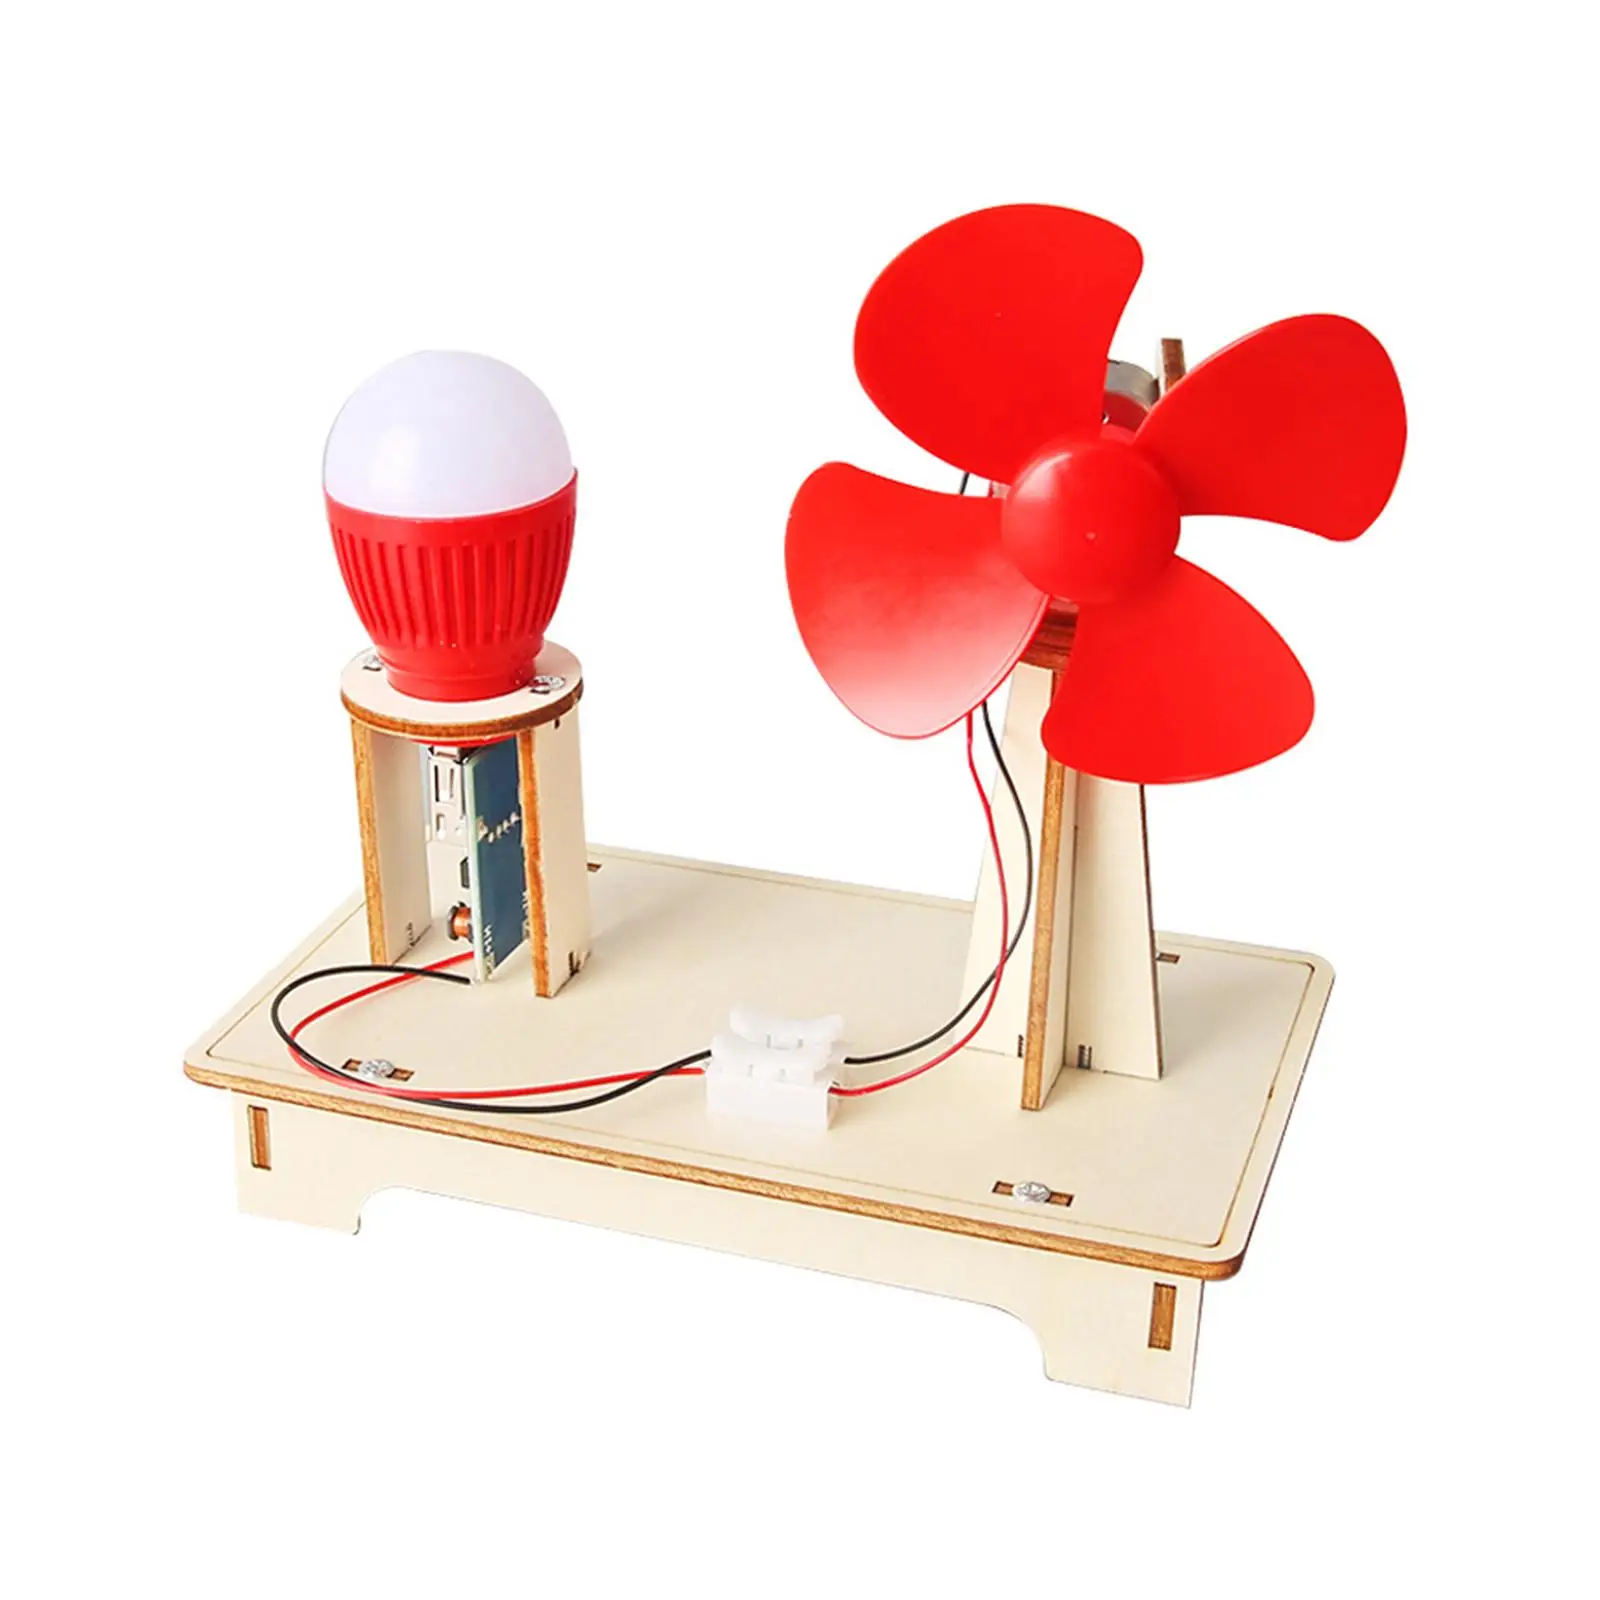 

Wooden Stem Models Building Toys Wind Turbines Small Inventions Science Experiment Stem Projects for Children Teens Gifts